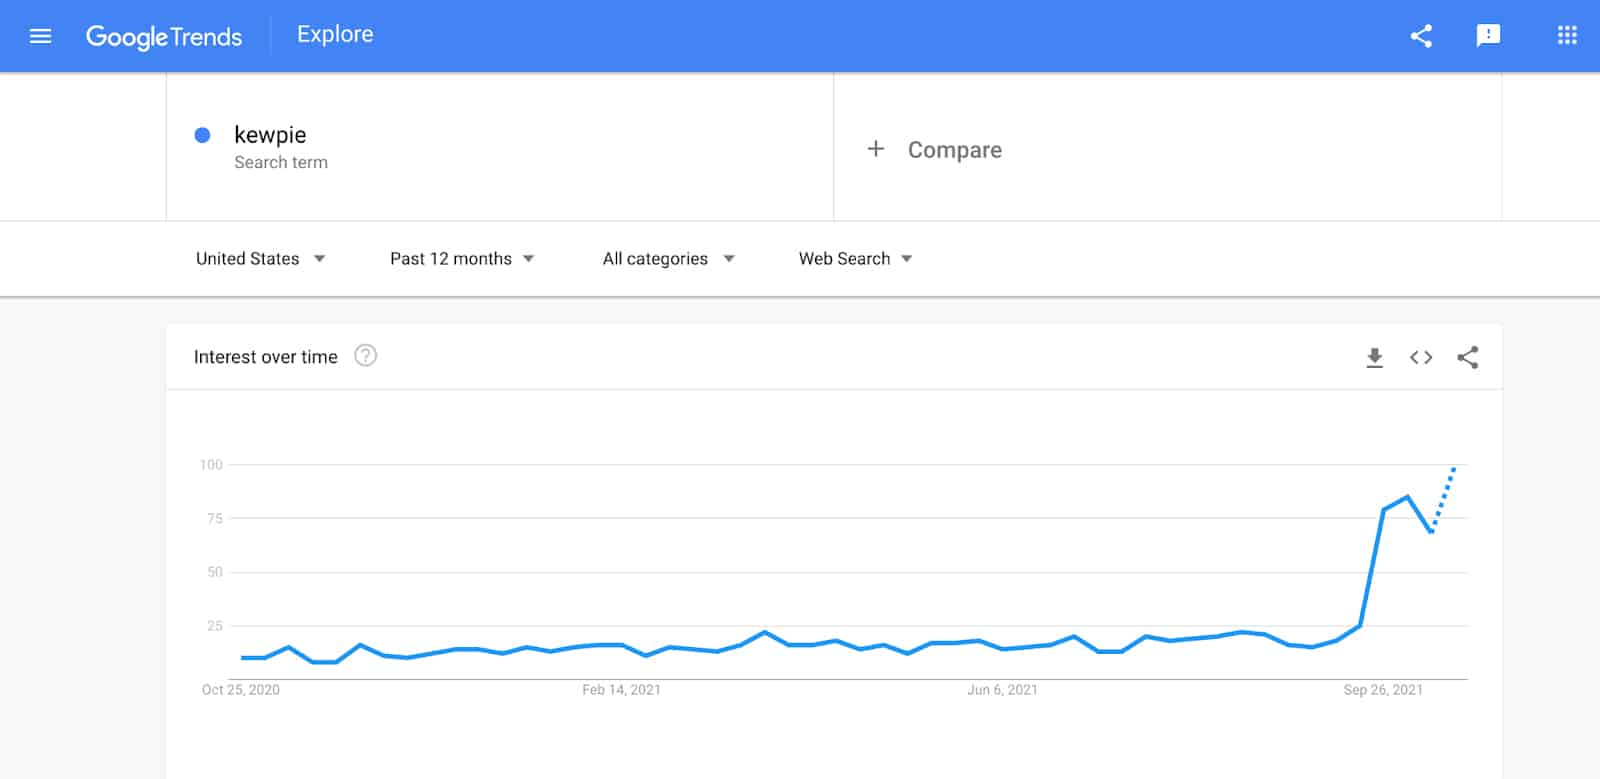 A graph for Kewpie mayo’s search volume on Google Trends.